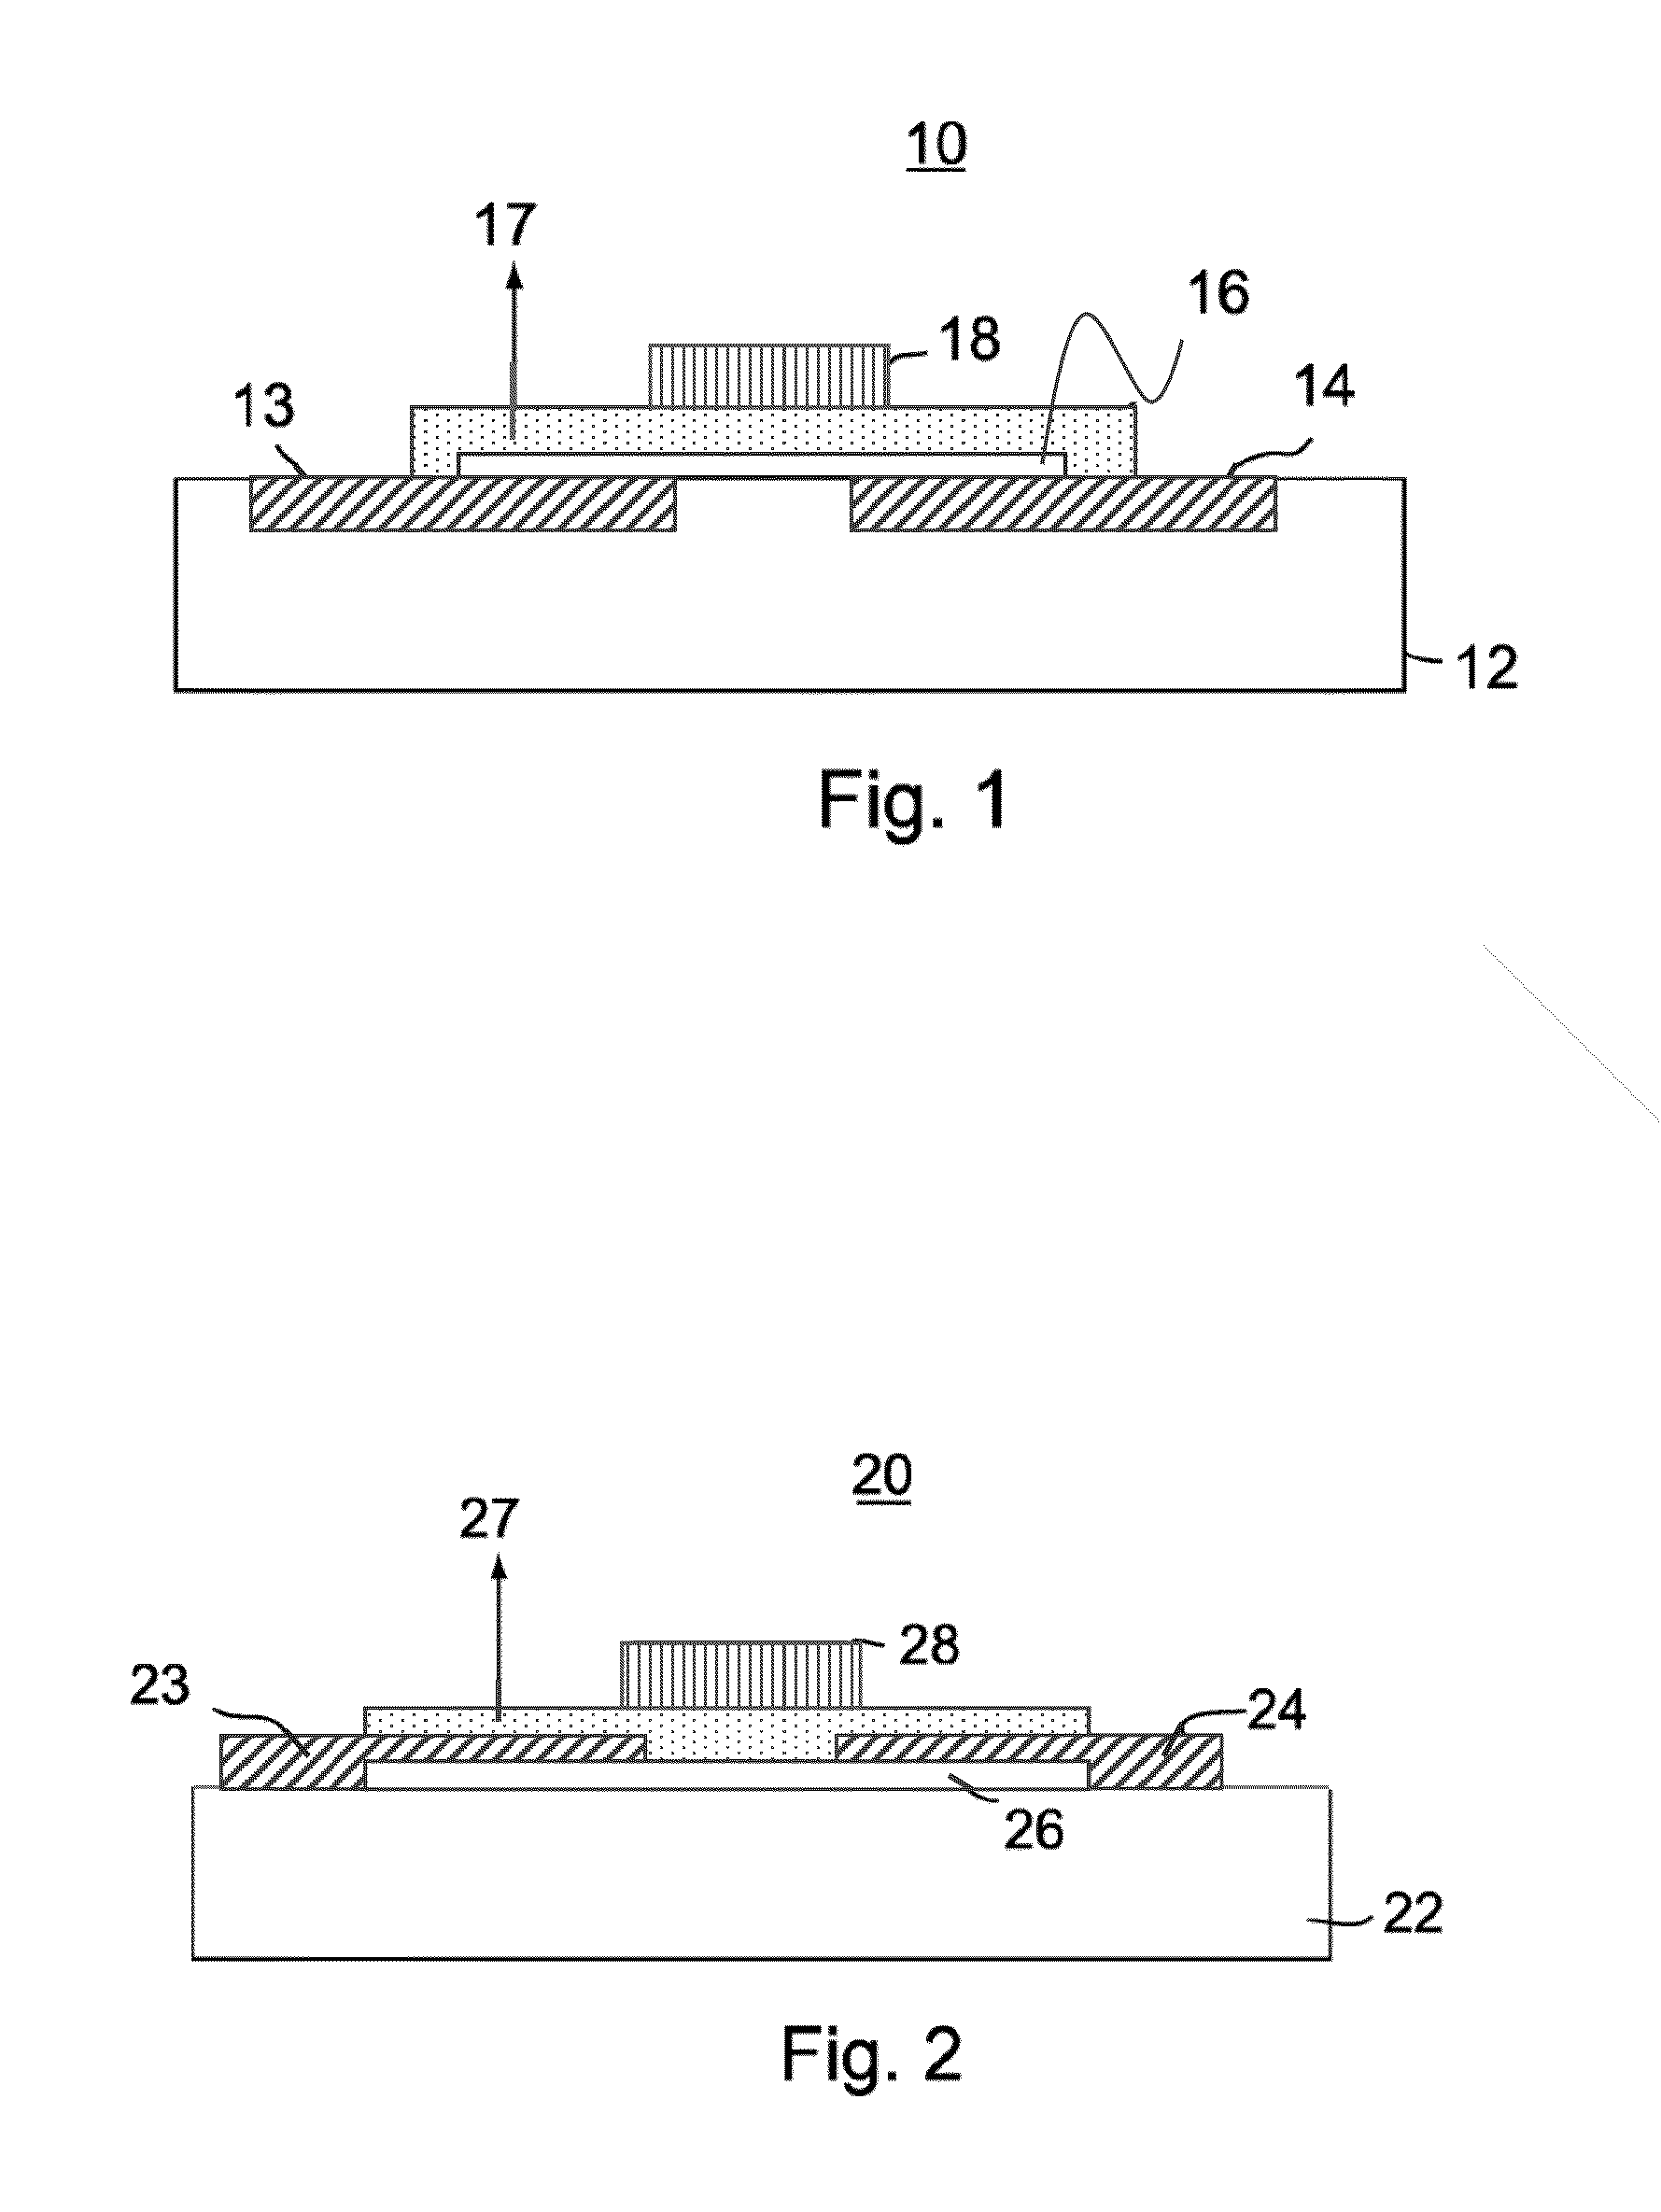 Stable metal-oxide thin film transistor and method of making